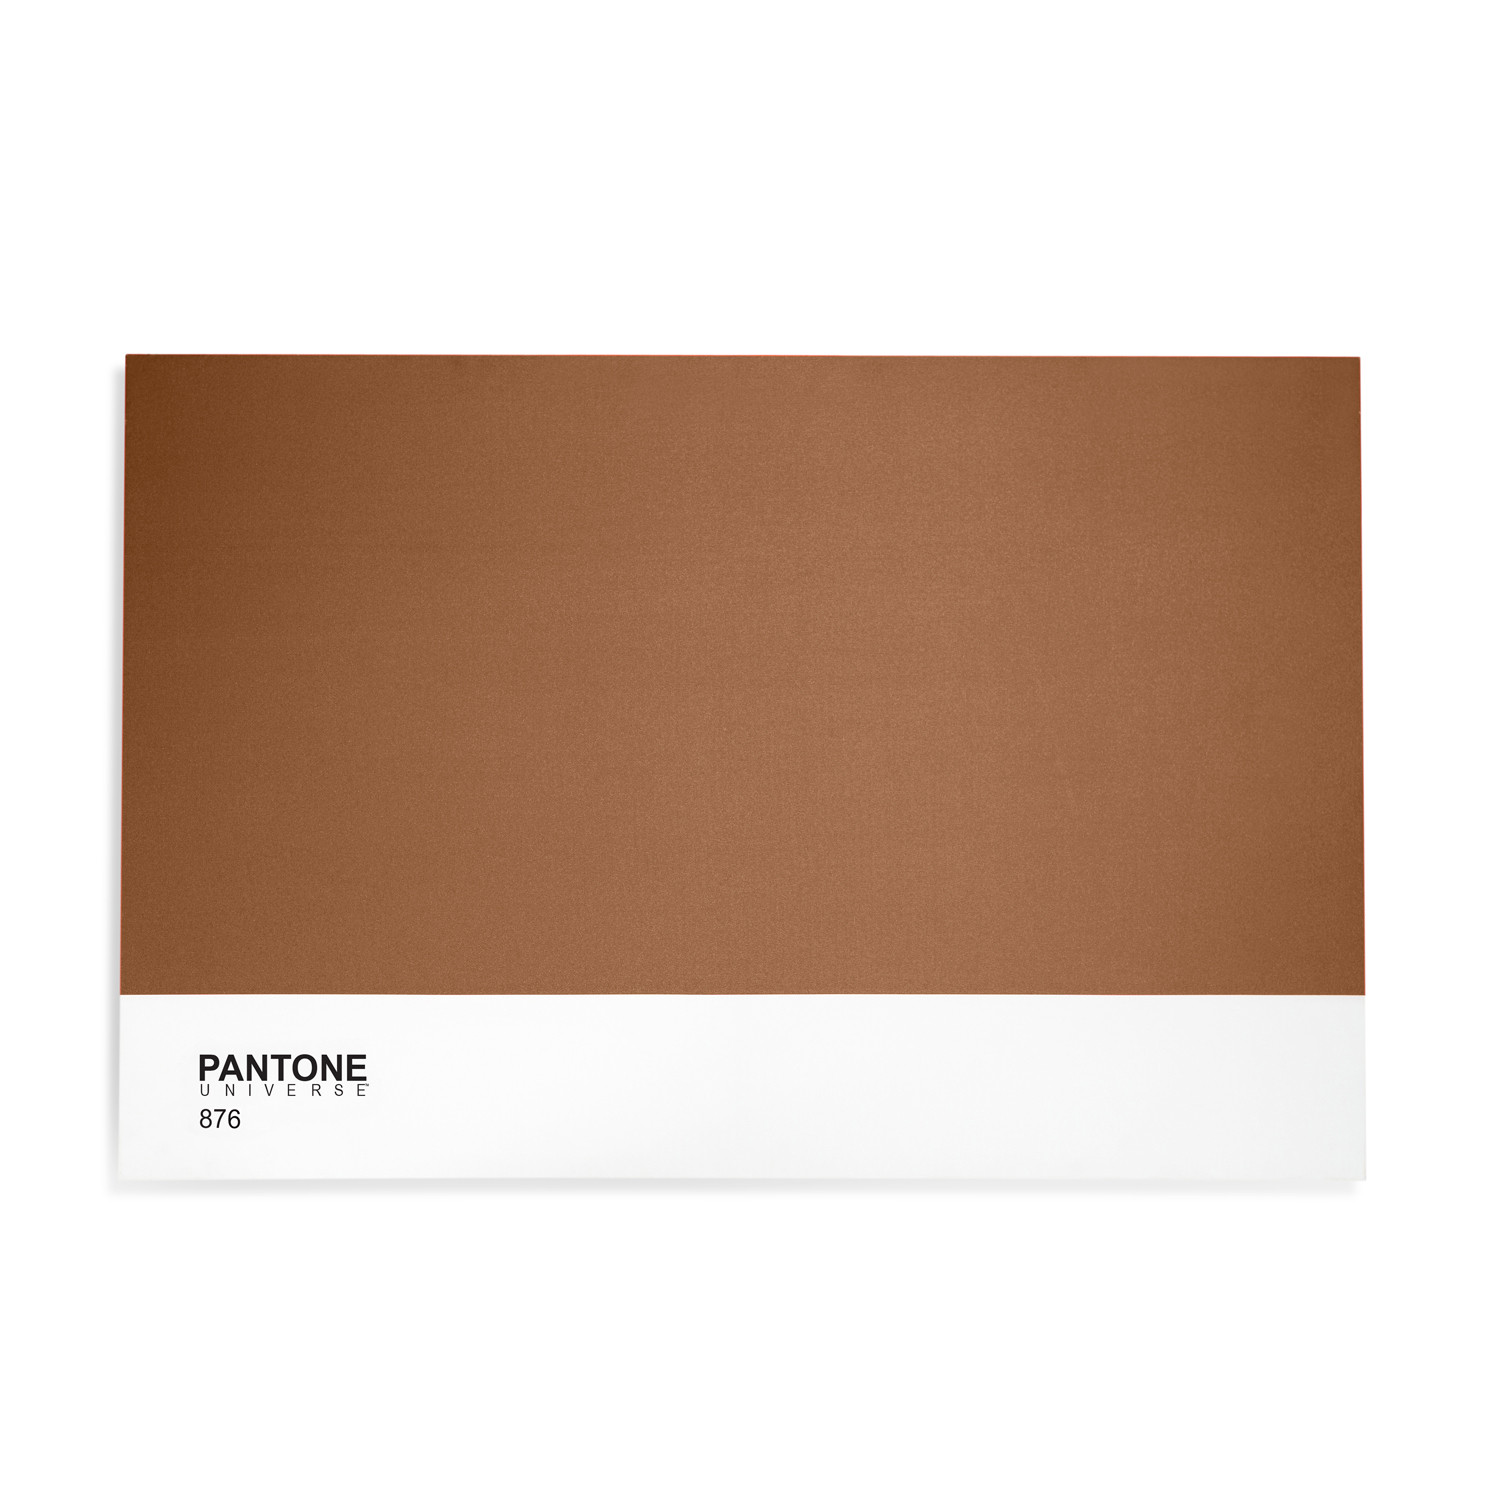 Limited Edition Collection Bronze 876 Pantone Touch BEDECOR Free Coloring Picture wallpaper give a chance to color on the wall without getting in trouble! Fill the walls of your home or office with stress-relieving [bedroomdecorz.blogspot.com]